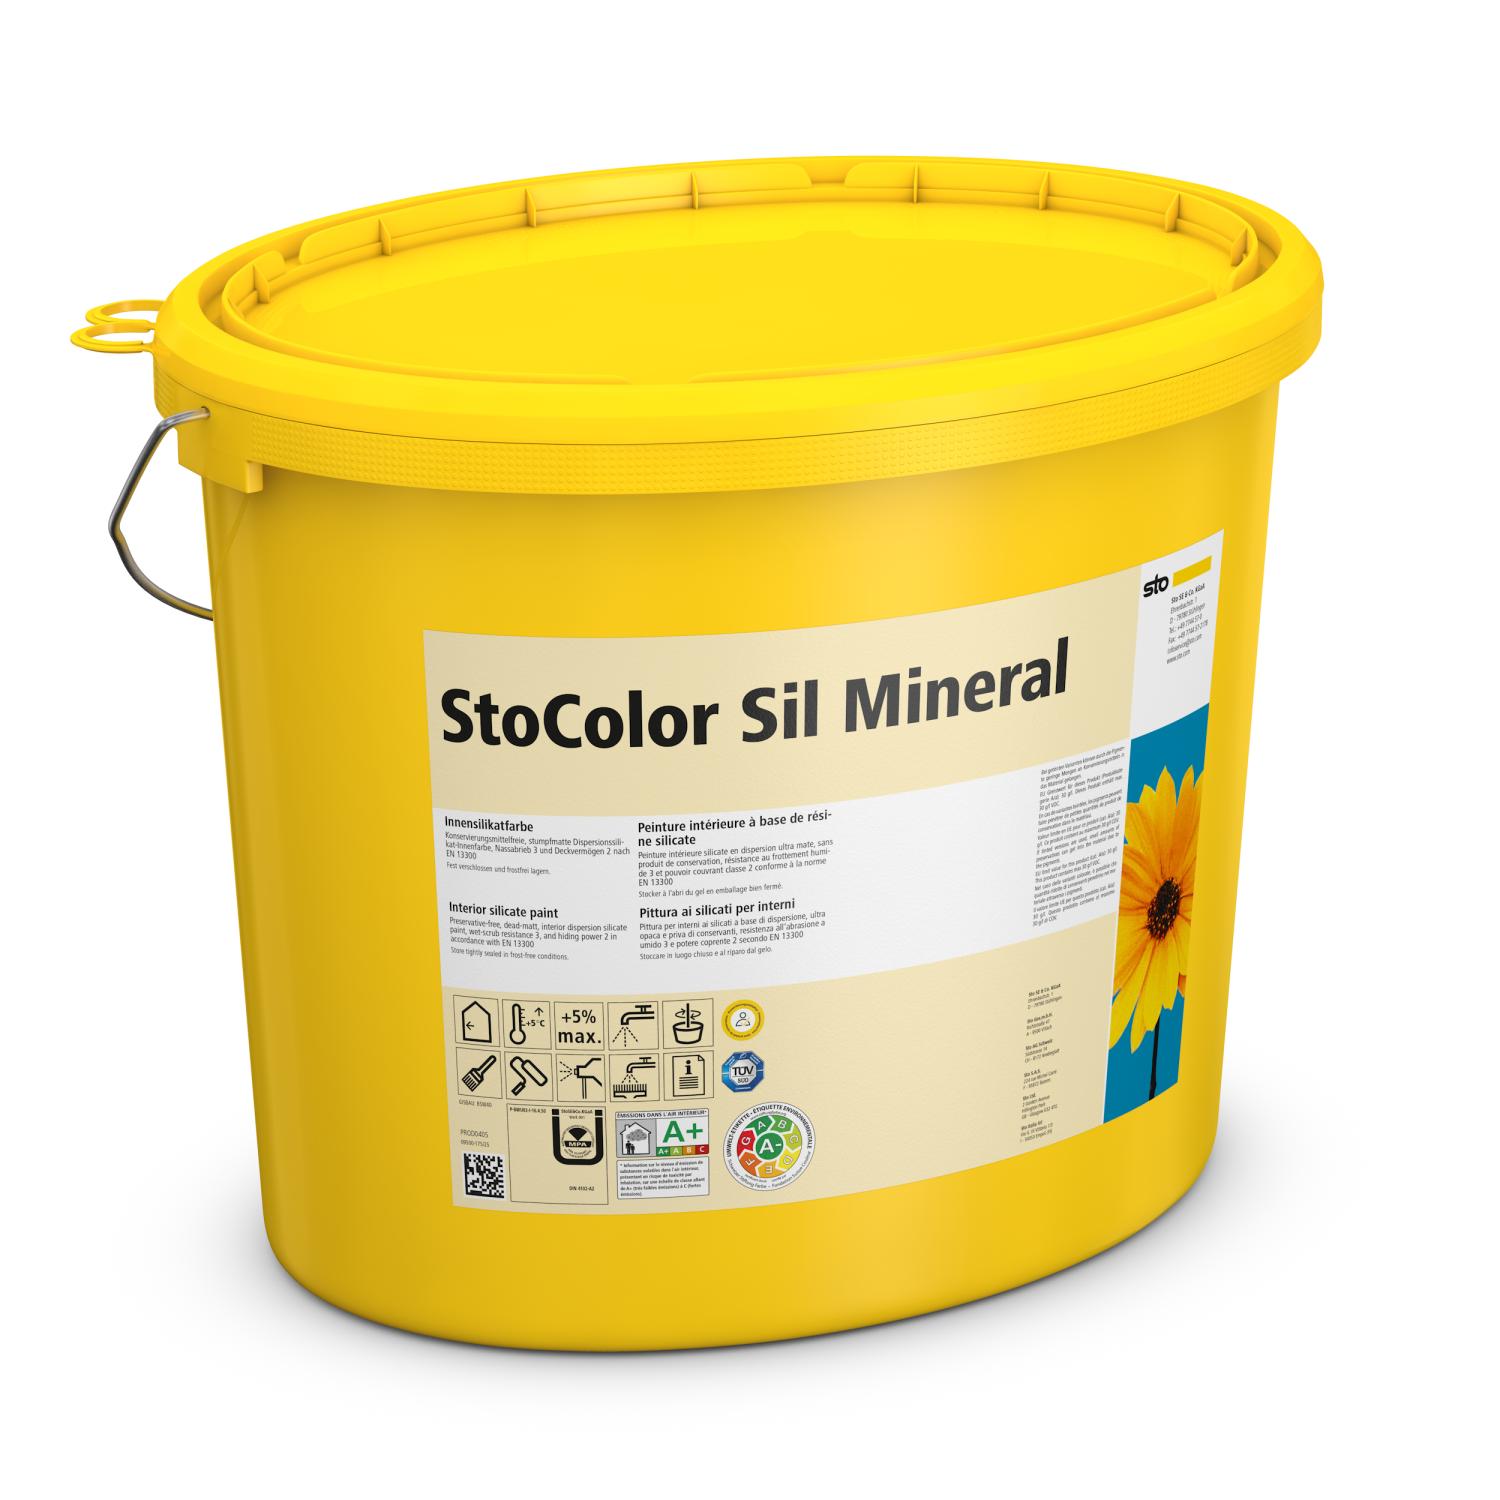 StoColor Sil Mineral